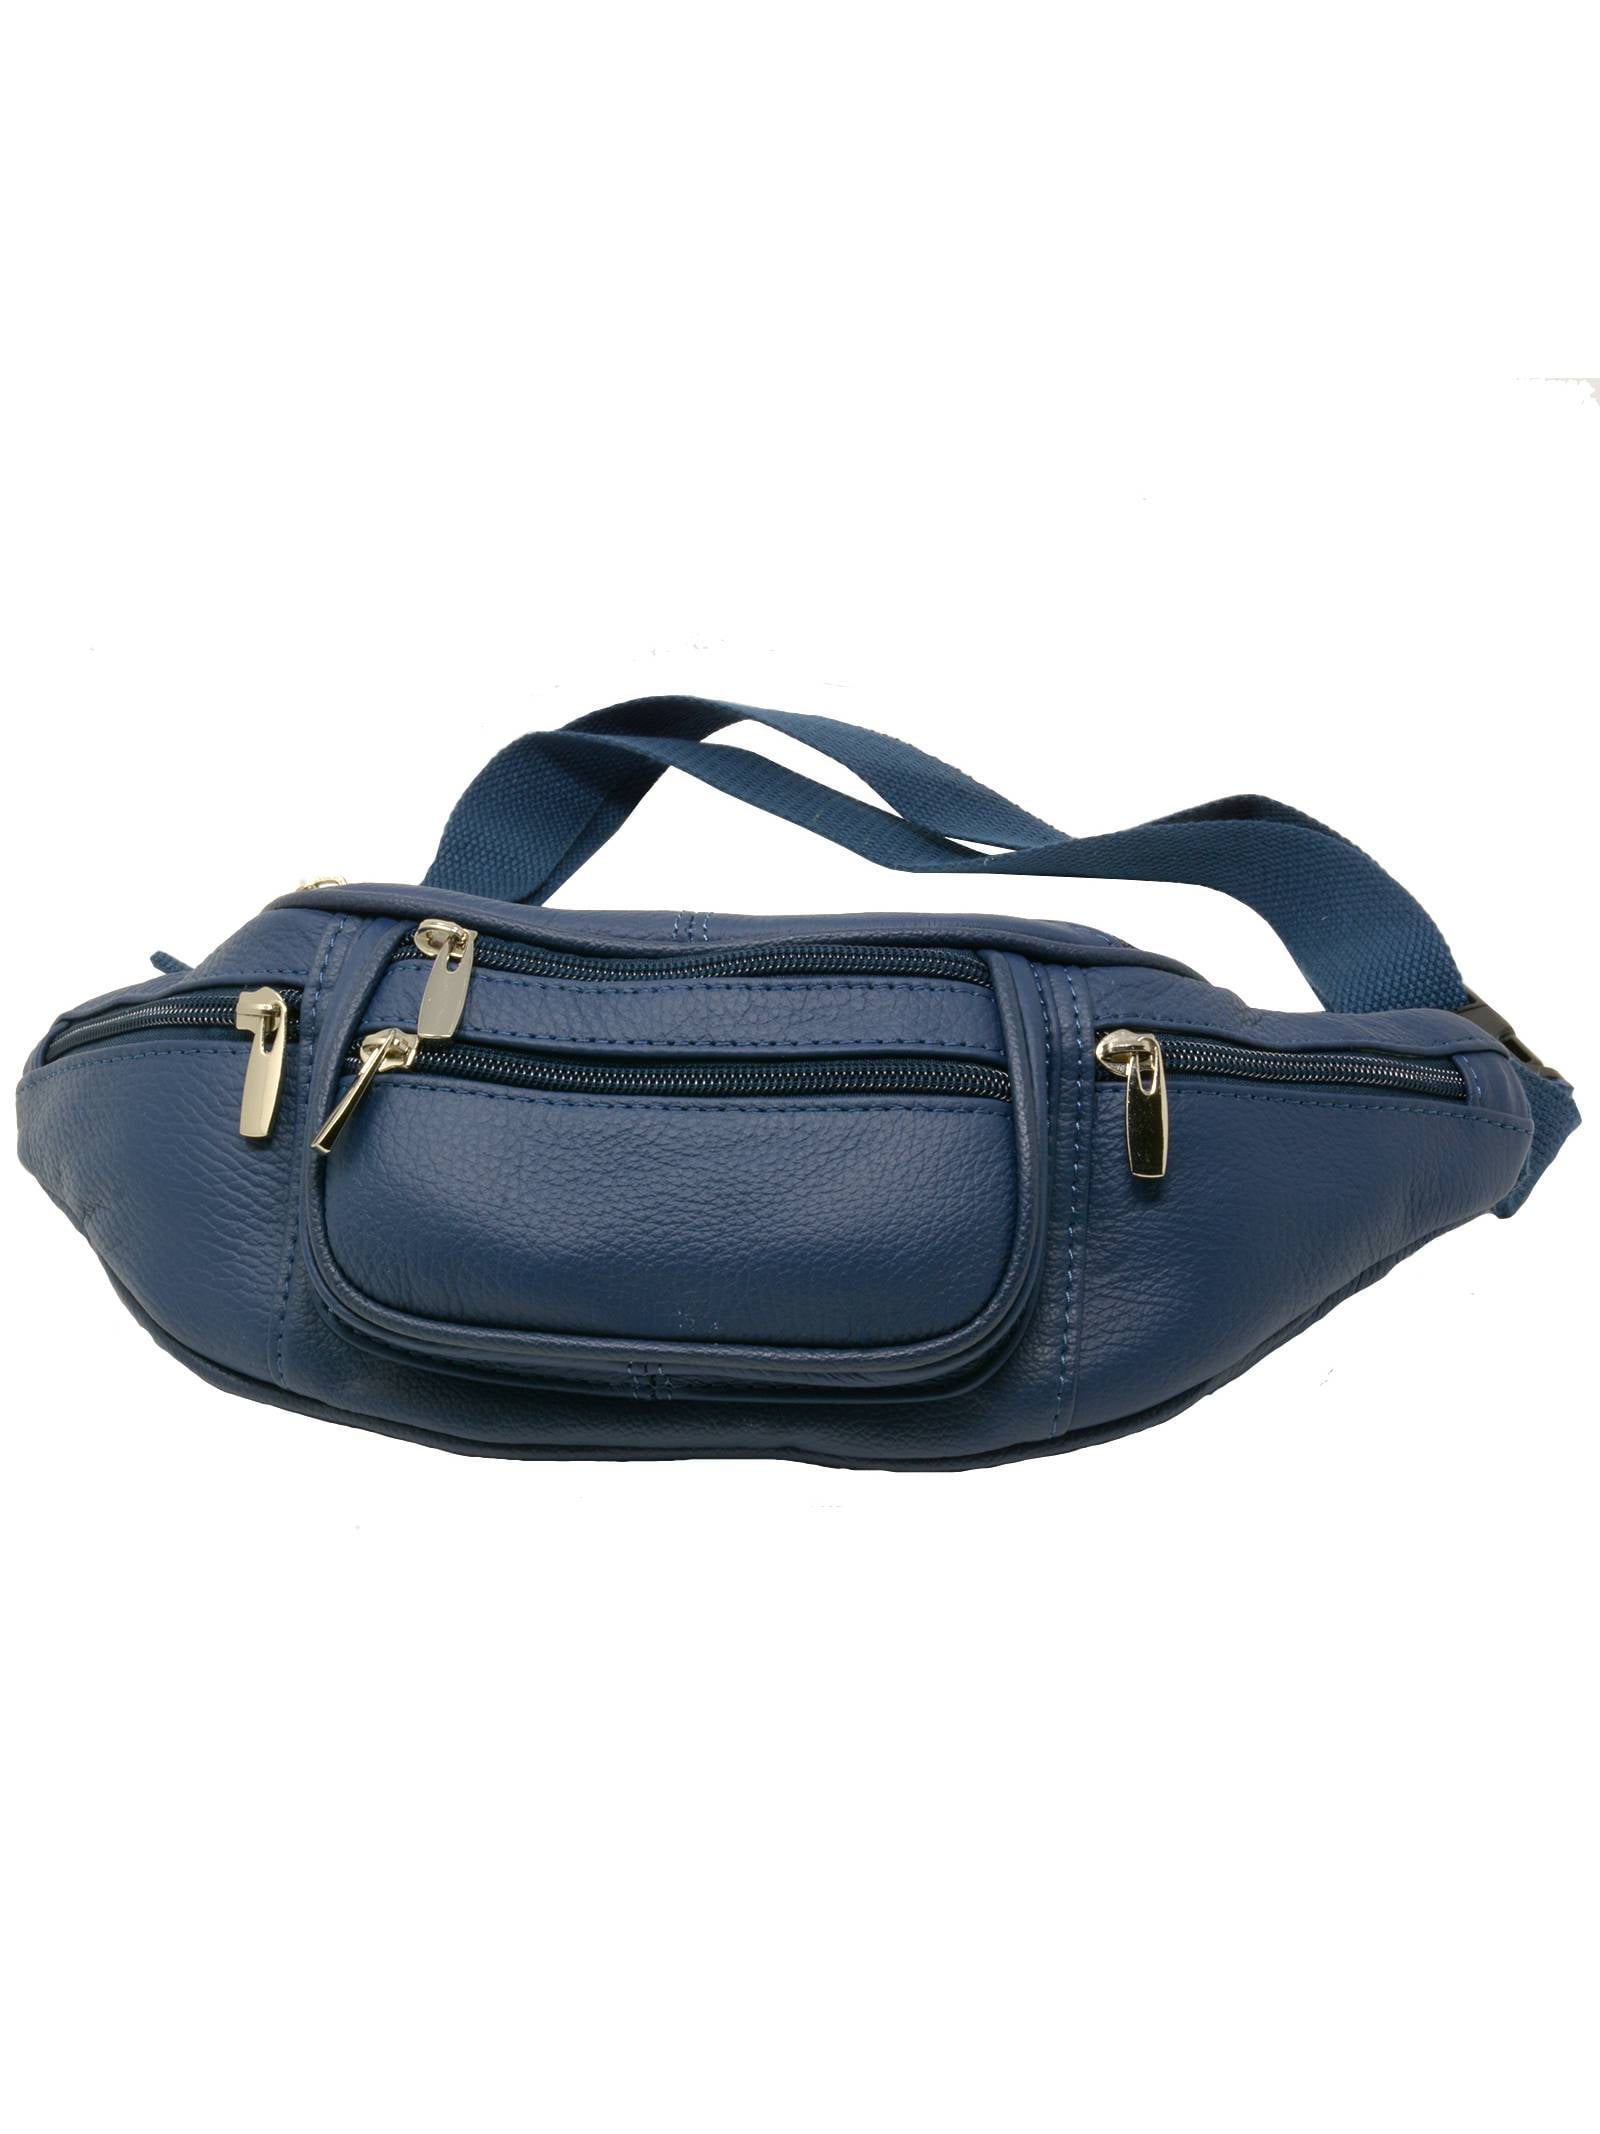 FASHION RACING ® Gift for Men Leather Bum Bag Fanny Pack 